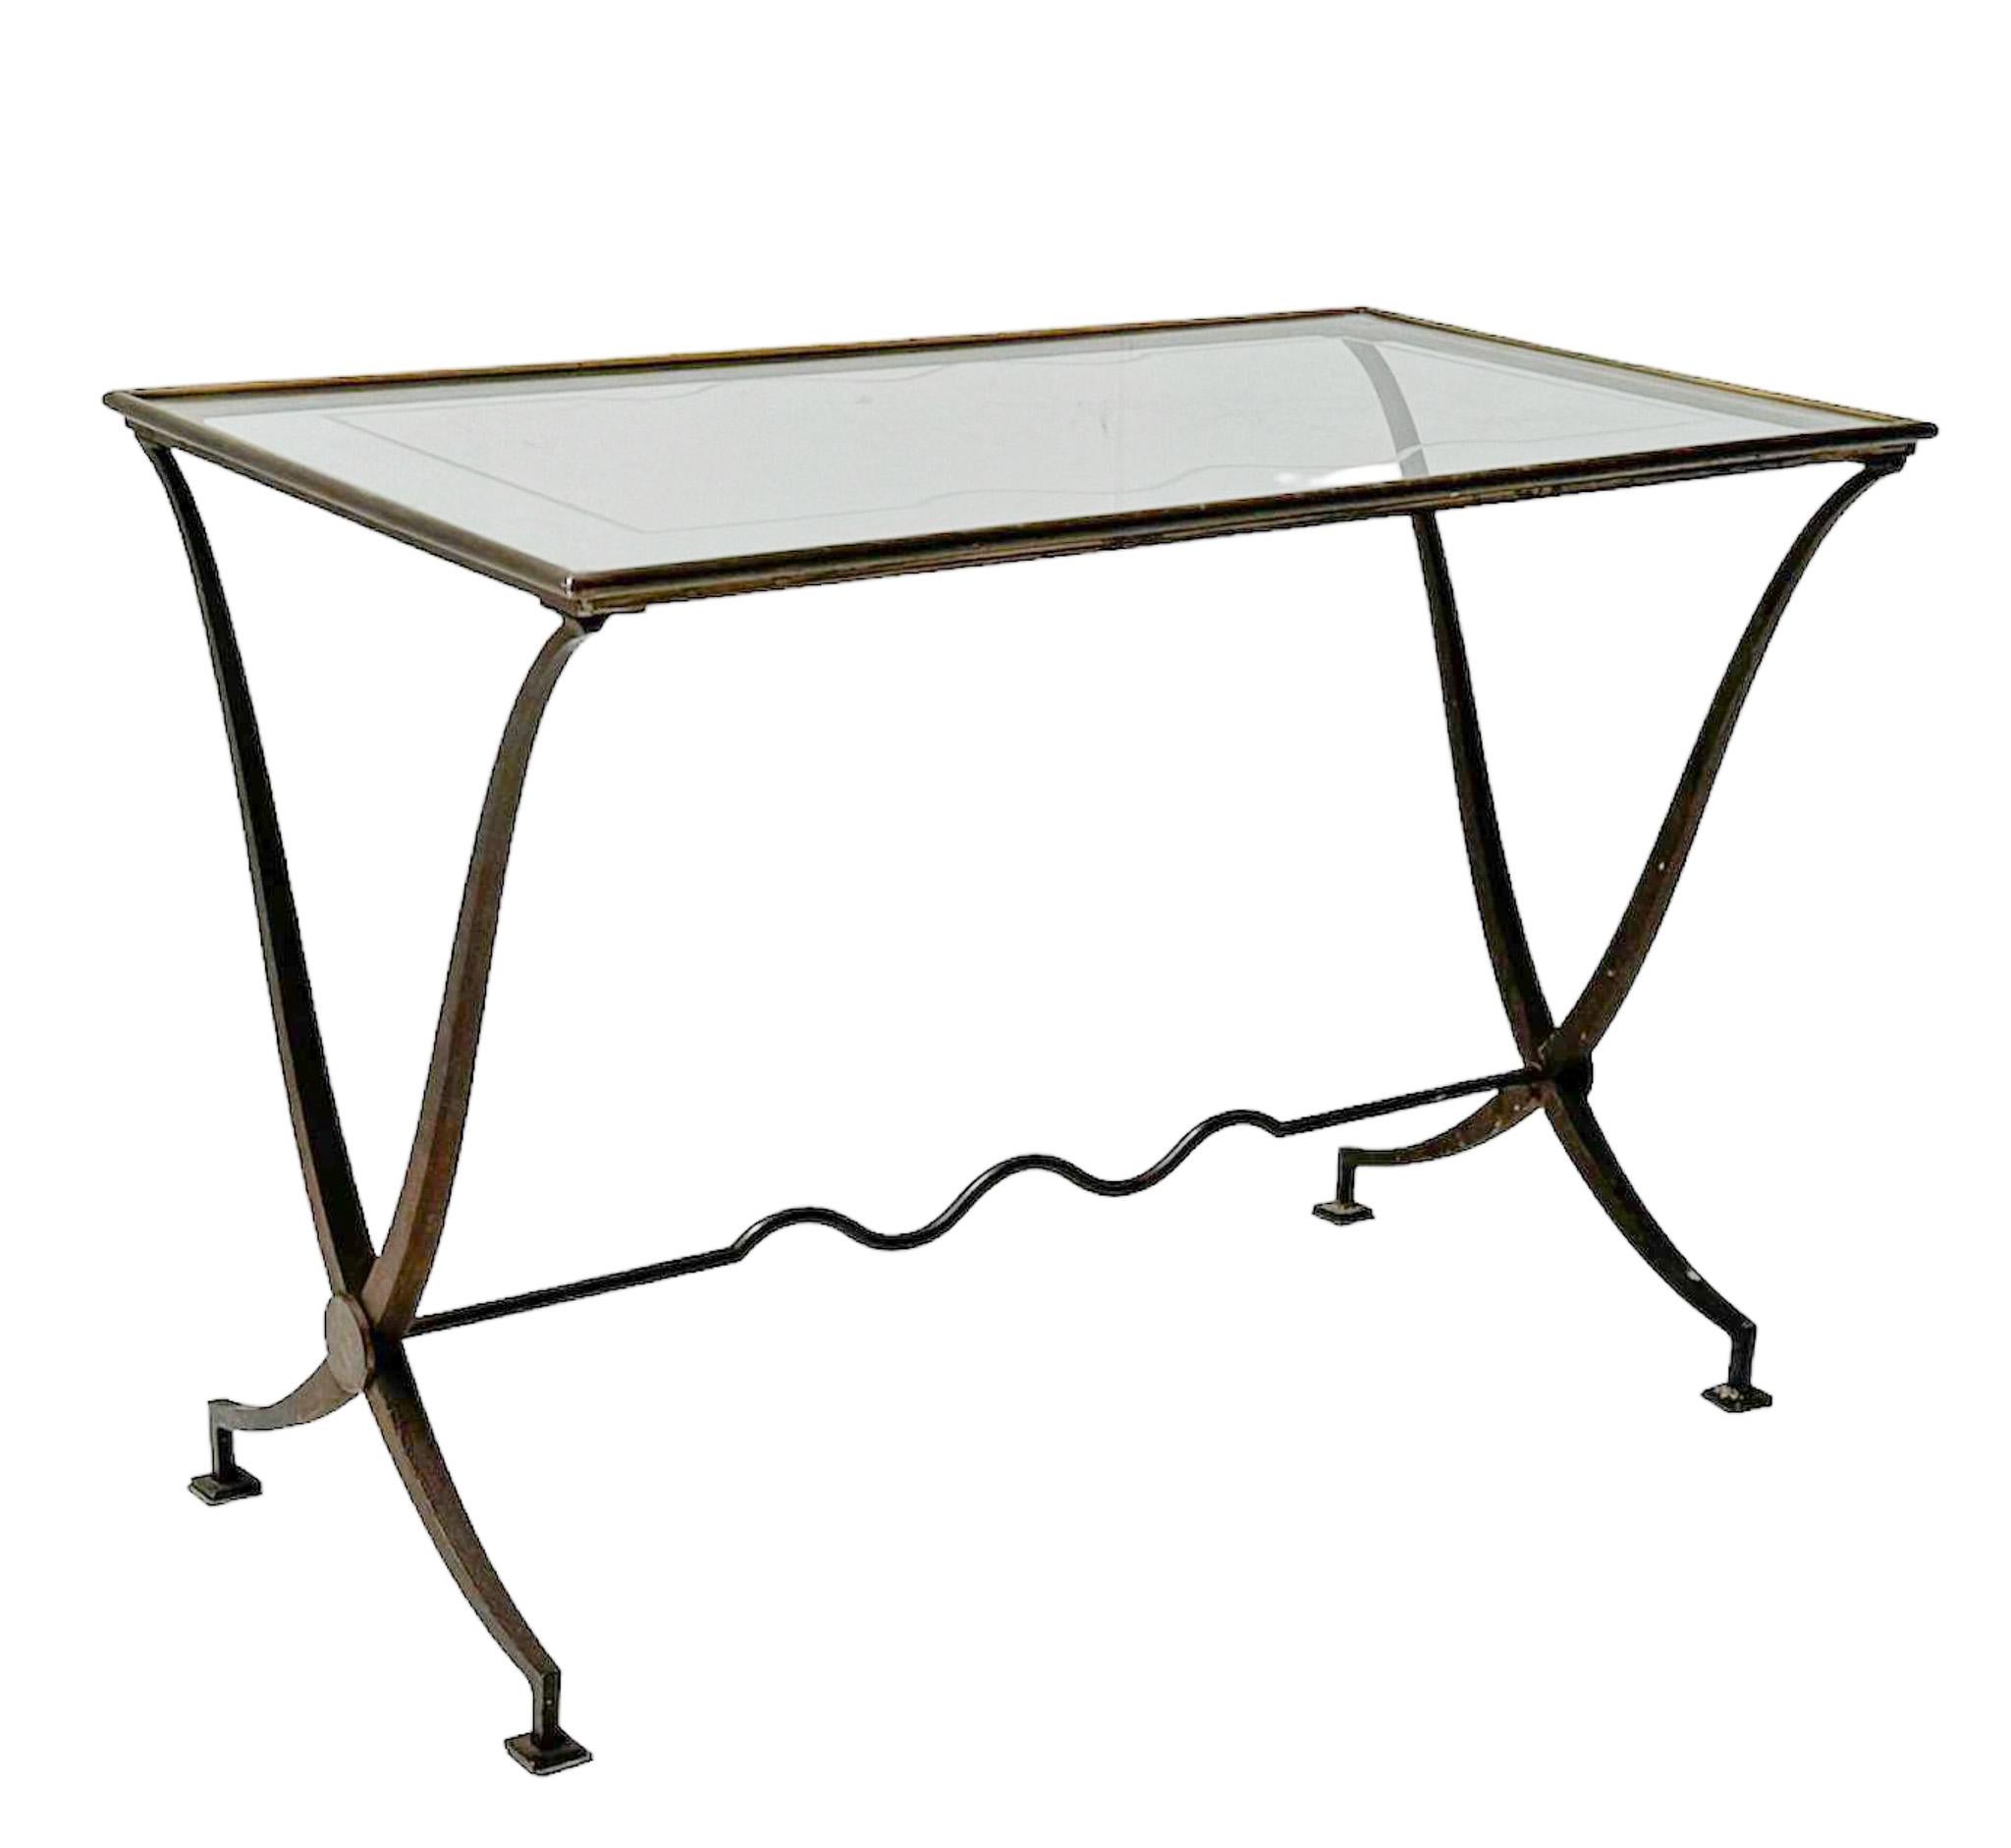 Stunning and elegant Hollywood Regency coffee table or cocktail table.
Striking French design from the 1970s.
Patinated iron and brass top with original glass top.
Top has some scratches from putting on drinks!
This wonderful Hollywood Regency